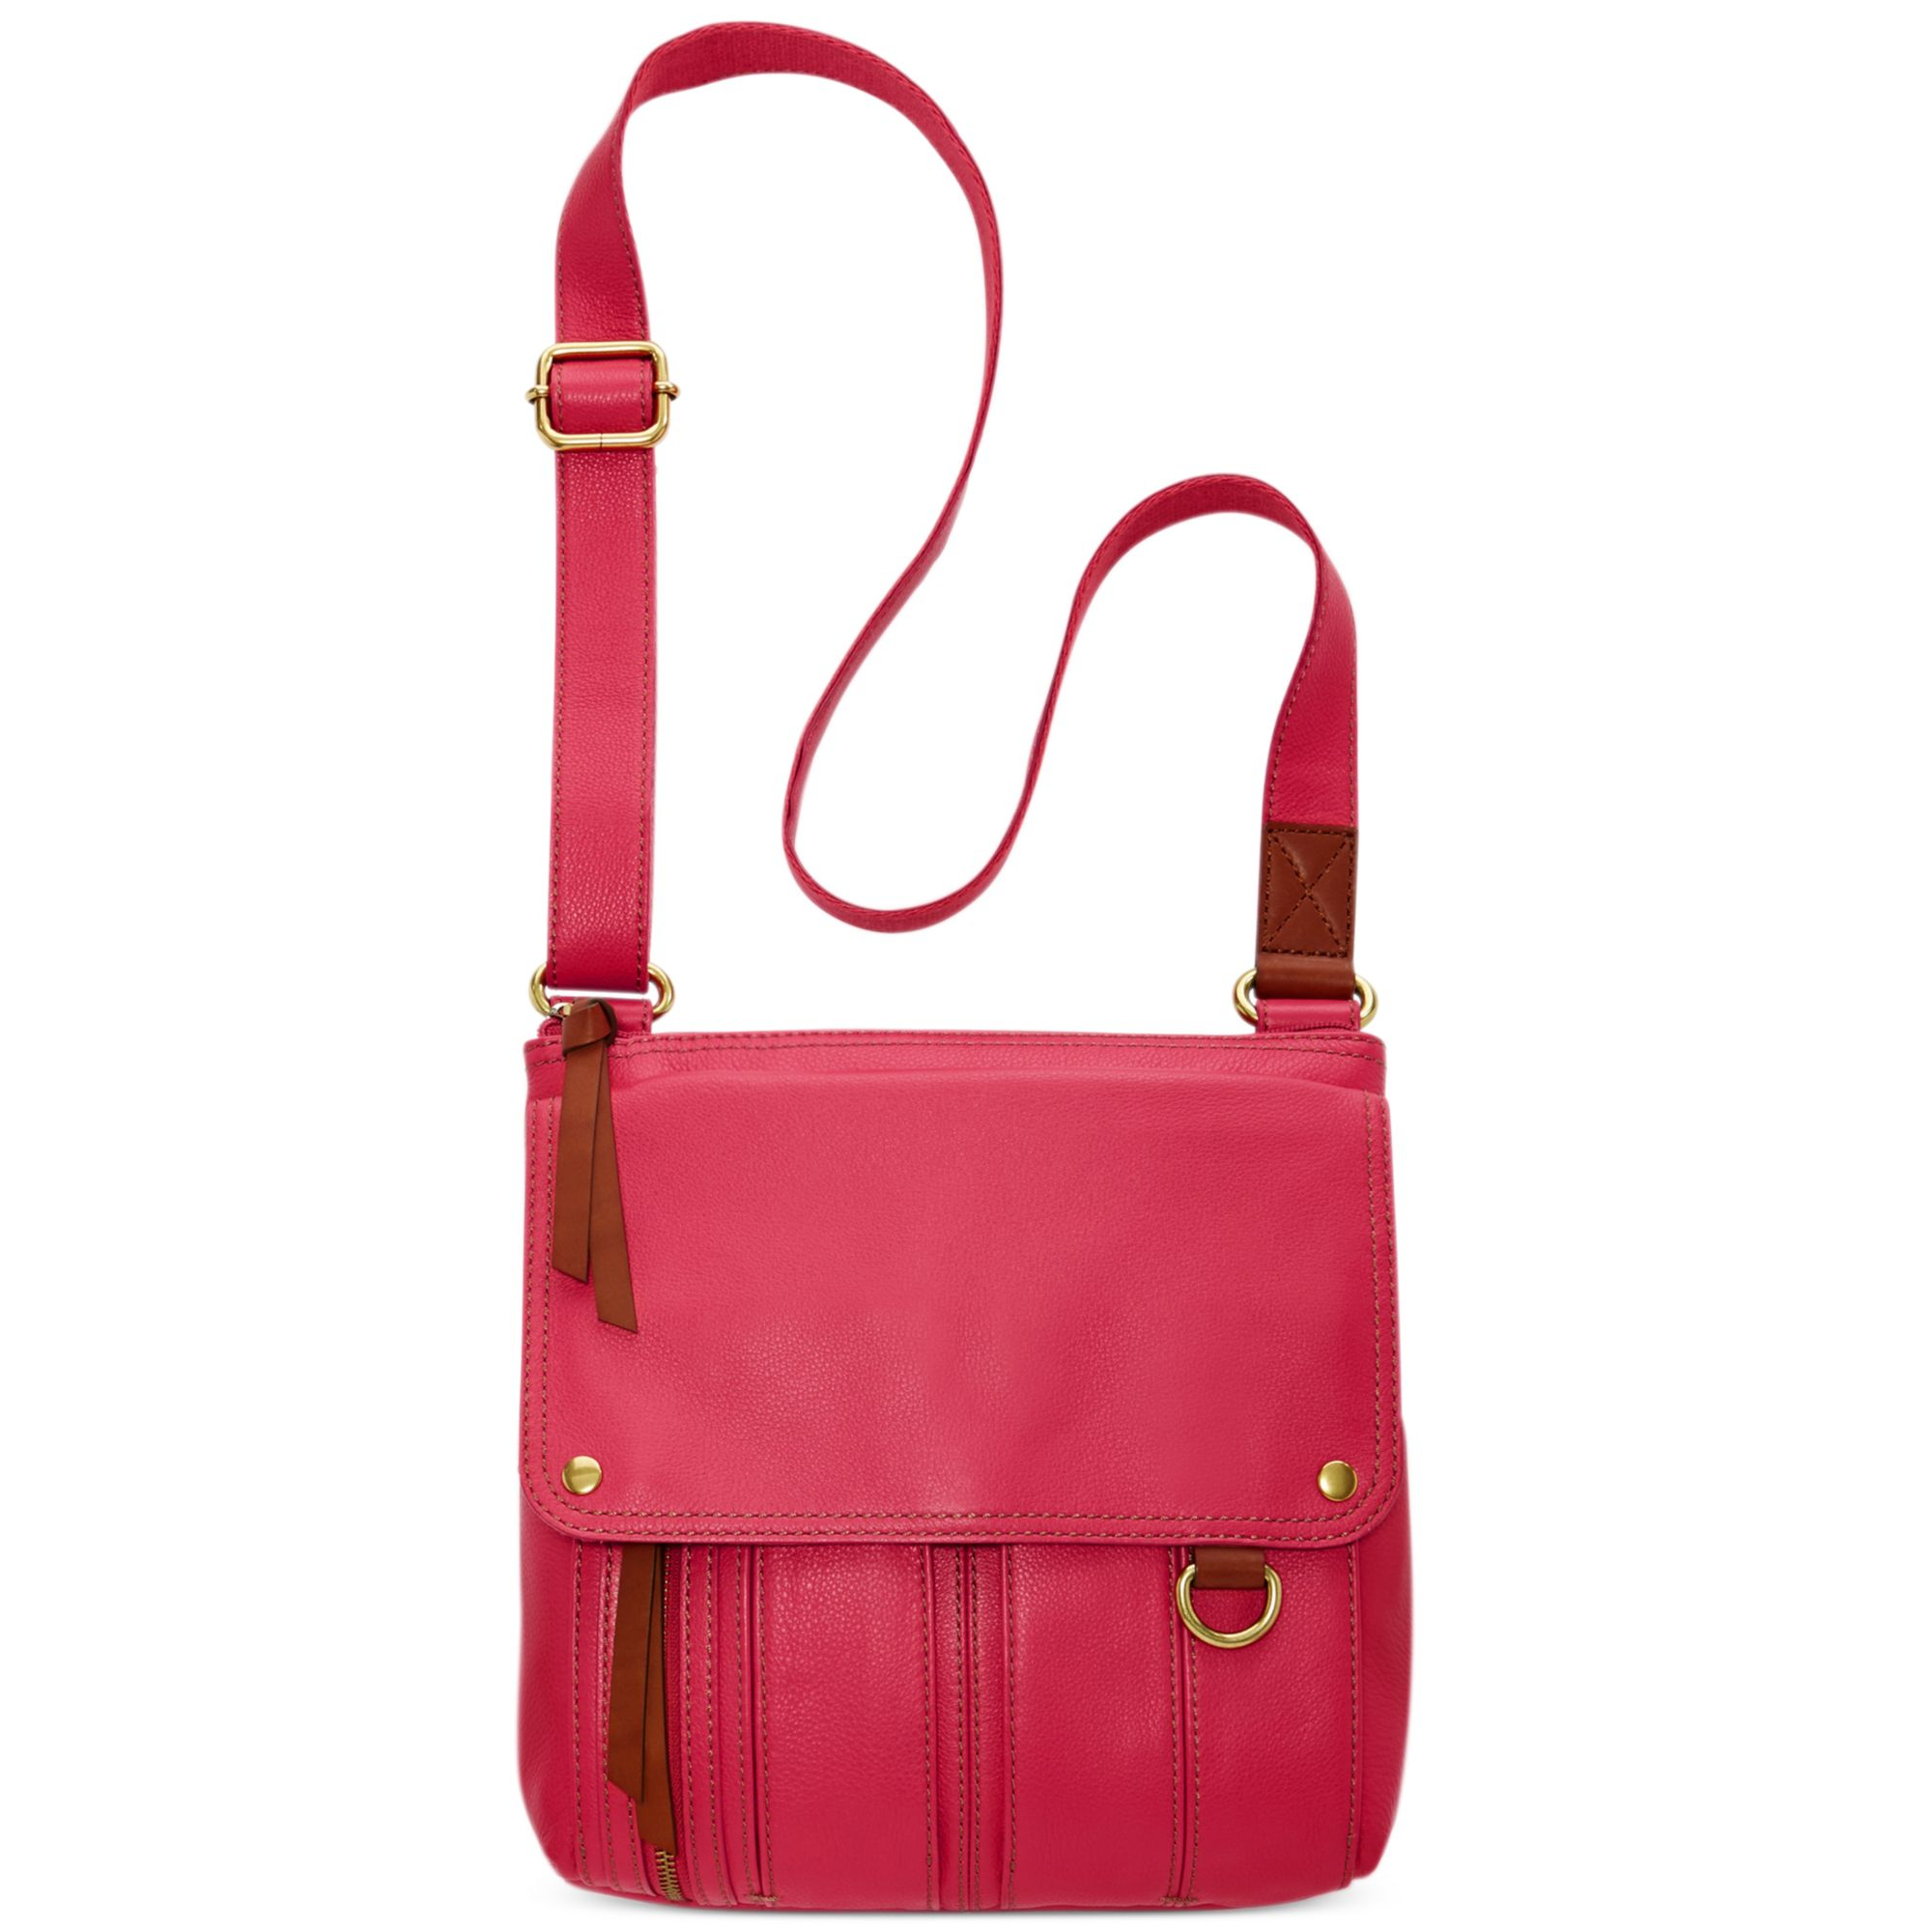 Fossil Morgan Leather Traveler Crossbody Bag in Pink (BRIGHT PINK) | Lyst